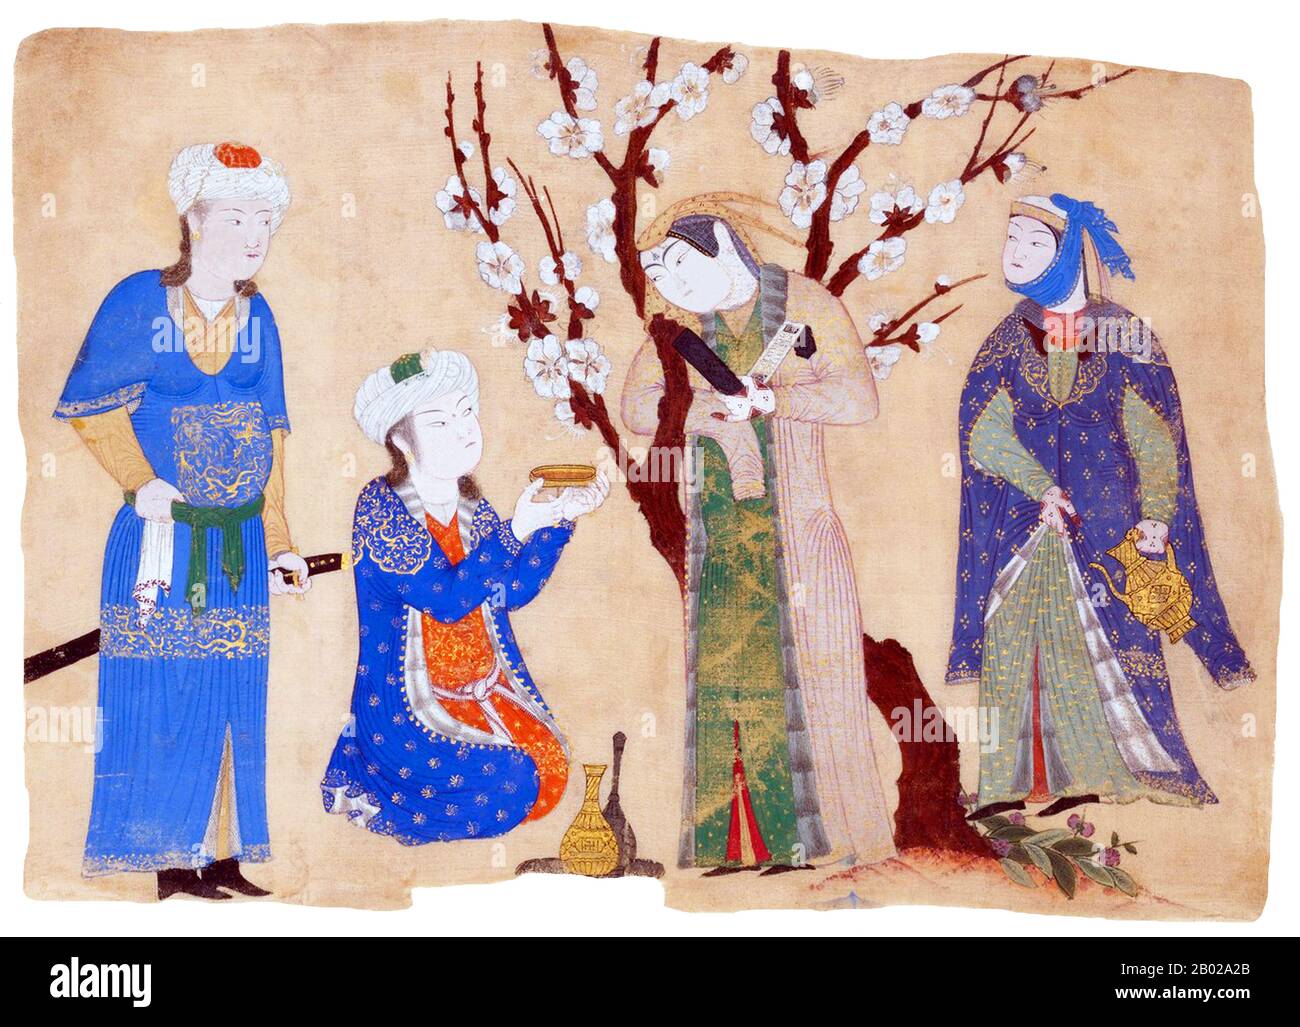 A young man offering a cup of wine to a young woman reflects a traditional Persian courtly ideal expressed in poetry and in painting. Yet it was common practice for Timurid artists to turn to Chinese models for stylistic inspiration.  In this painting, Chinese influence can be seen in the arrangement of figures on a horizontal groundline set against a neutral background, and in the identity and sinuous style of the flowering prunus tree that frames the princess. Stock Photo